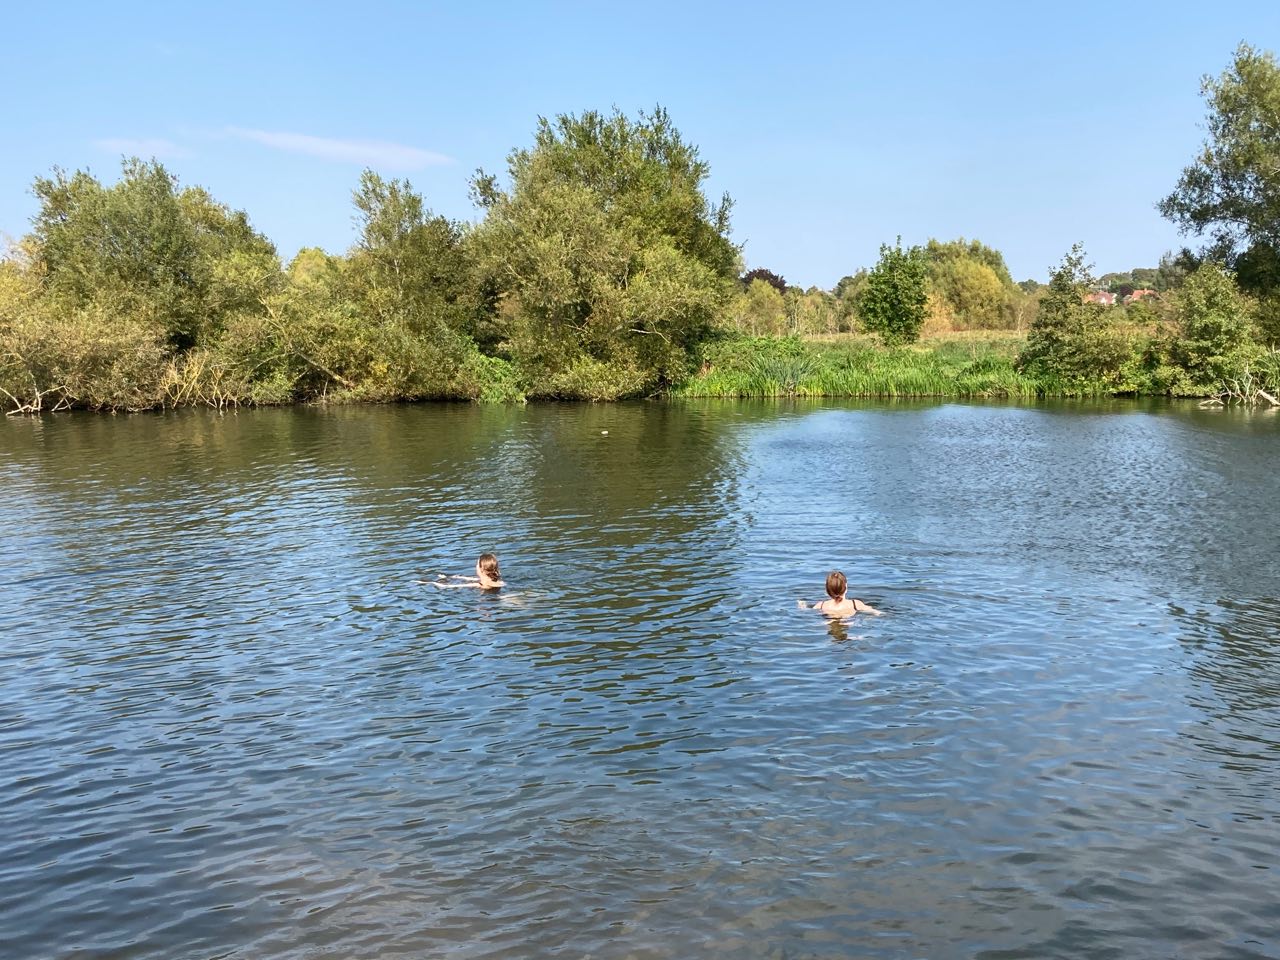 Two girls swimming in a river on a sunny day